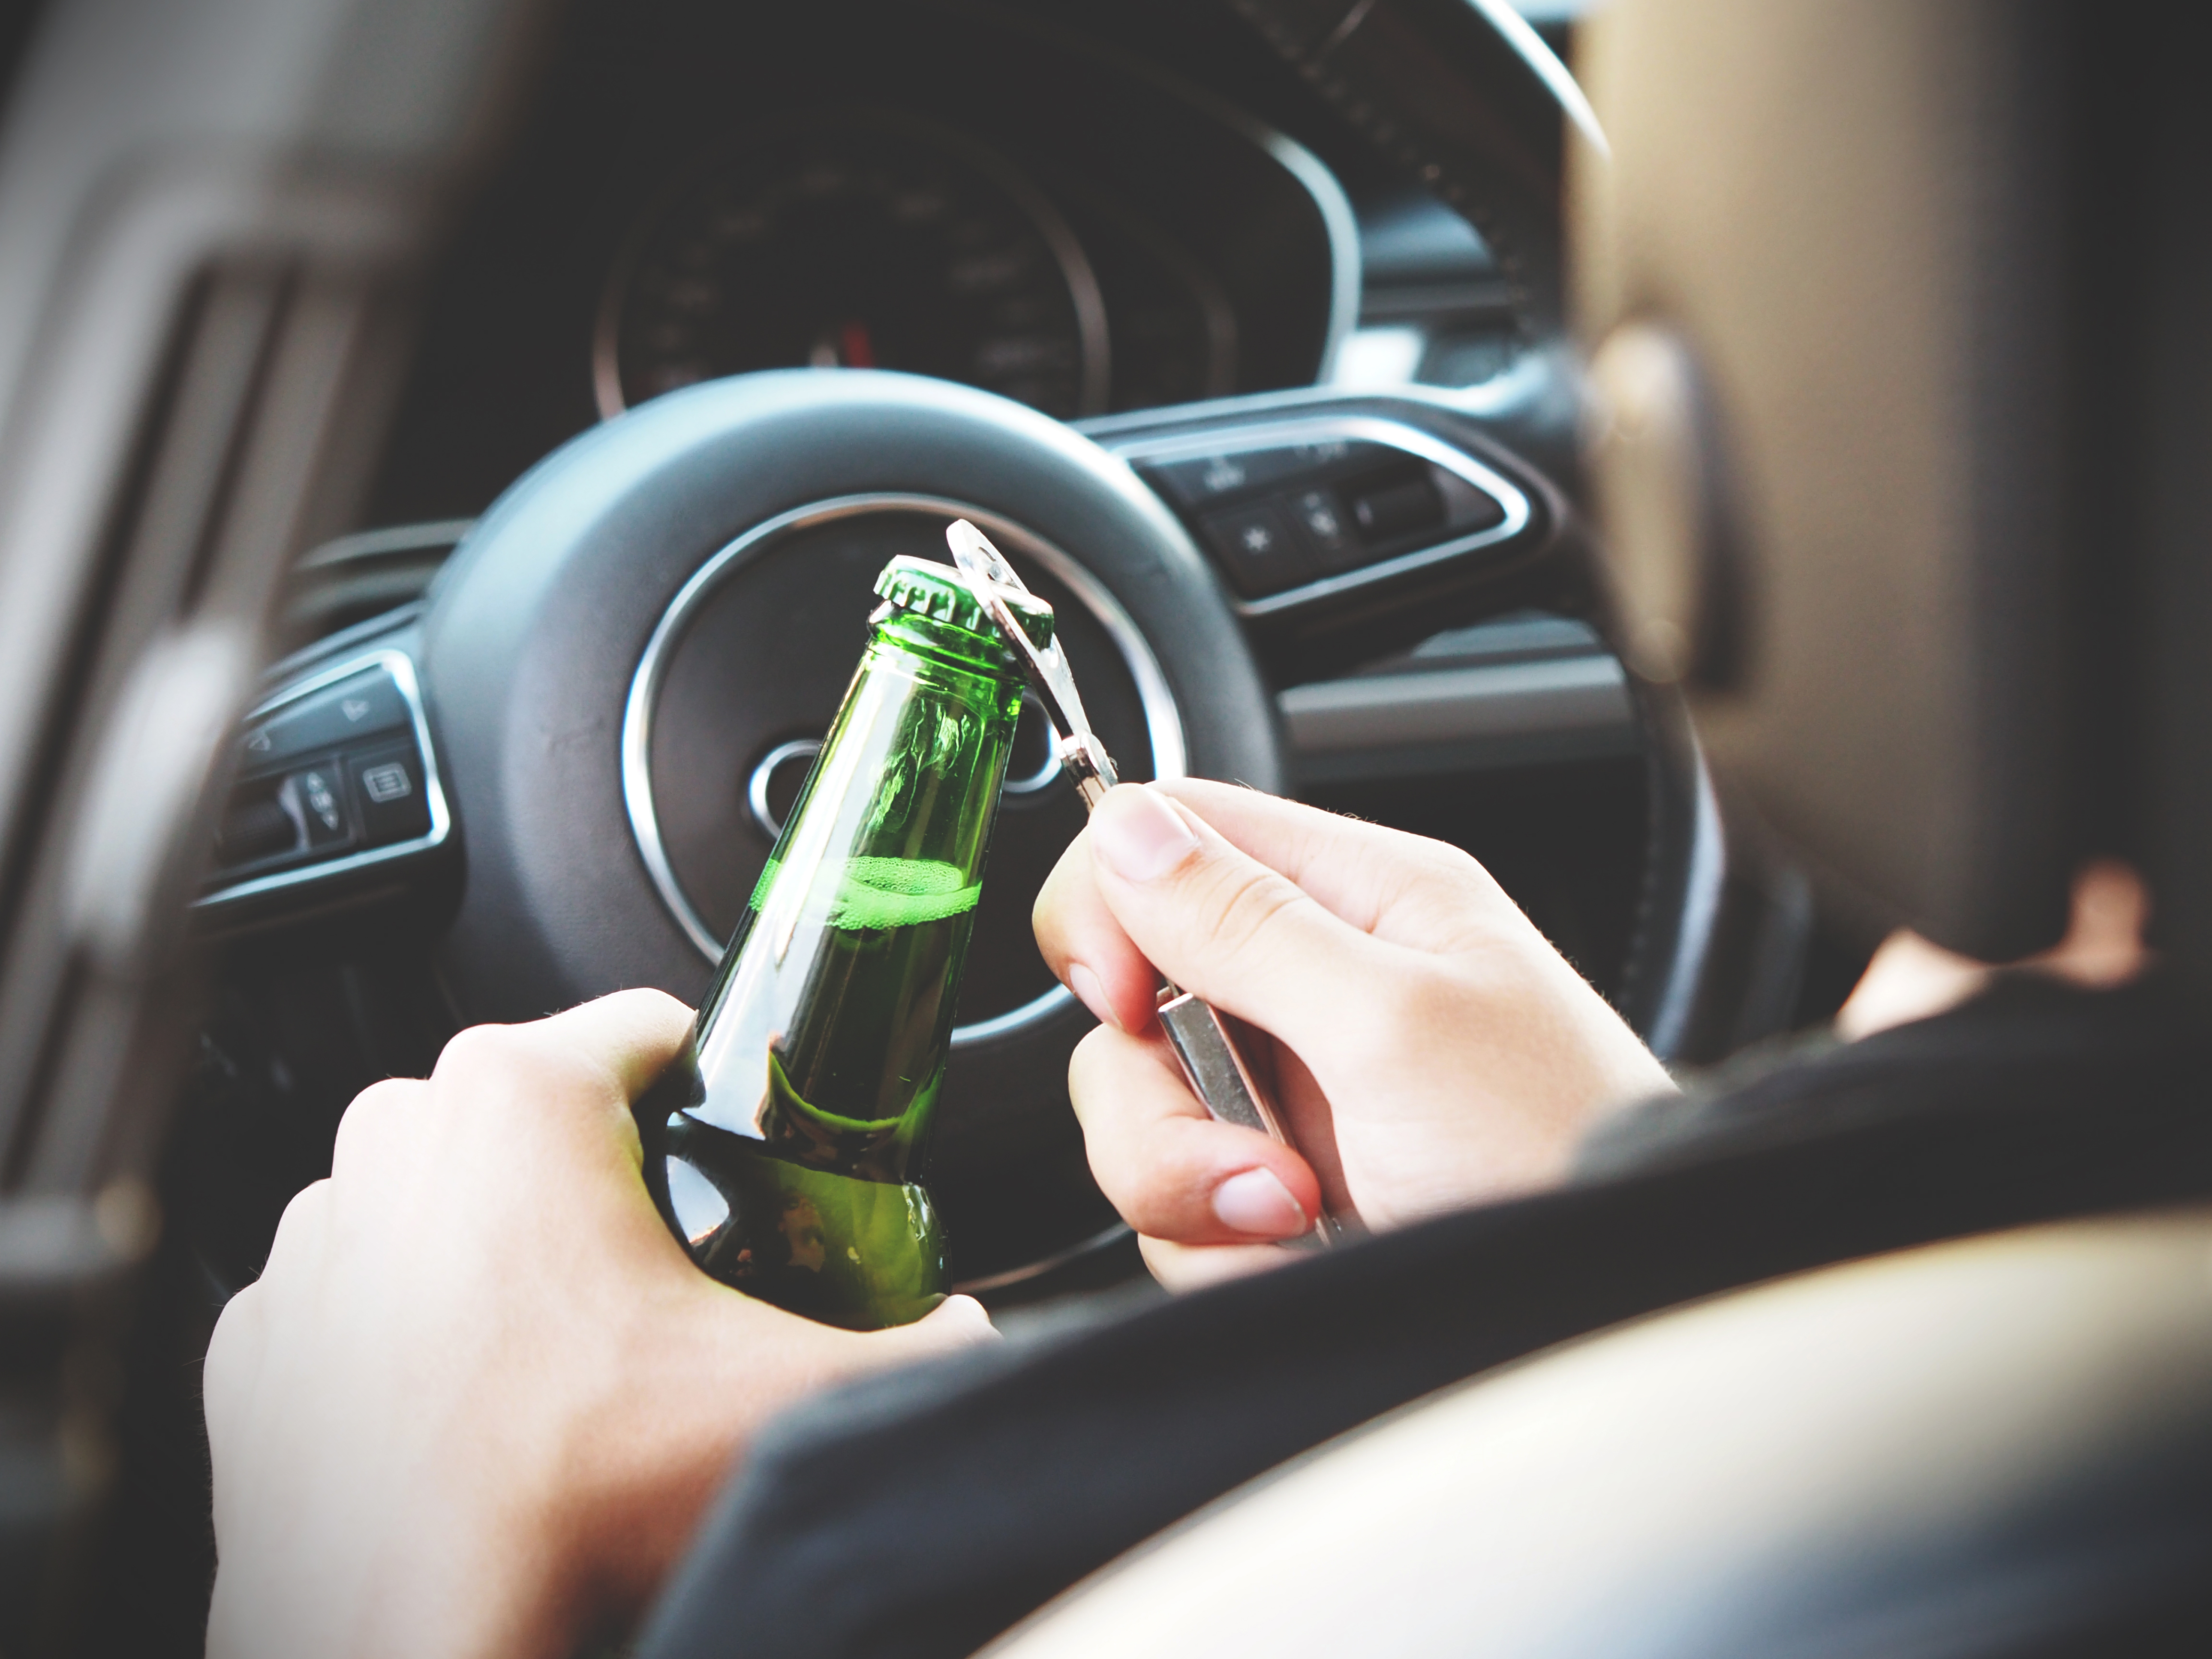 When a person becomes intoxicated and operates a vehicle, their actions can lead to innocent drivers and passengers becoming severely injured.